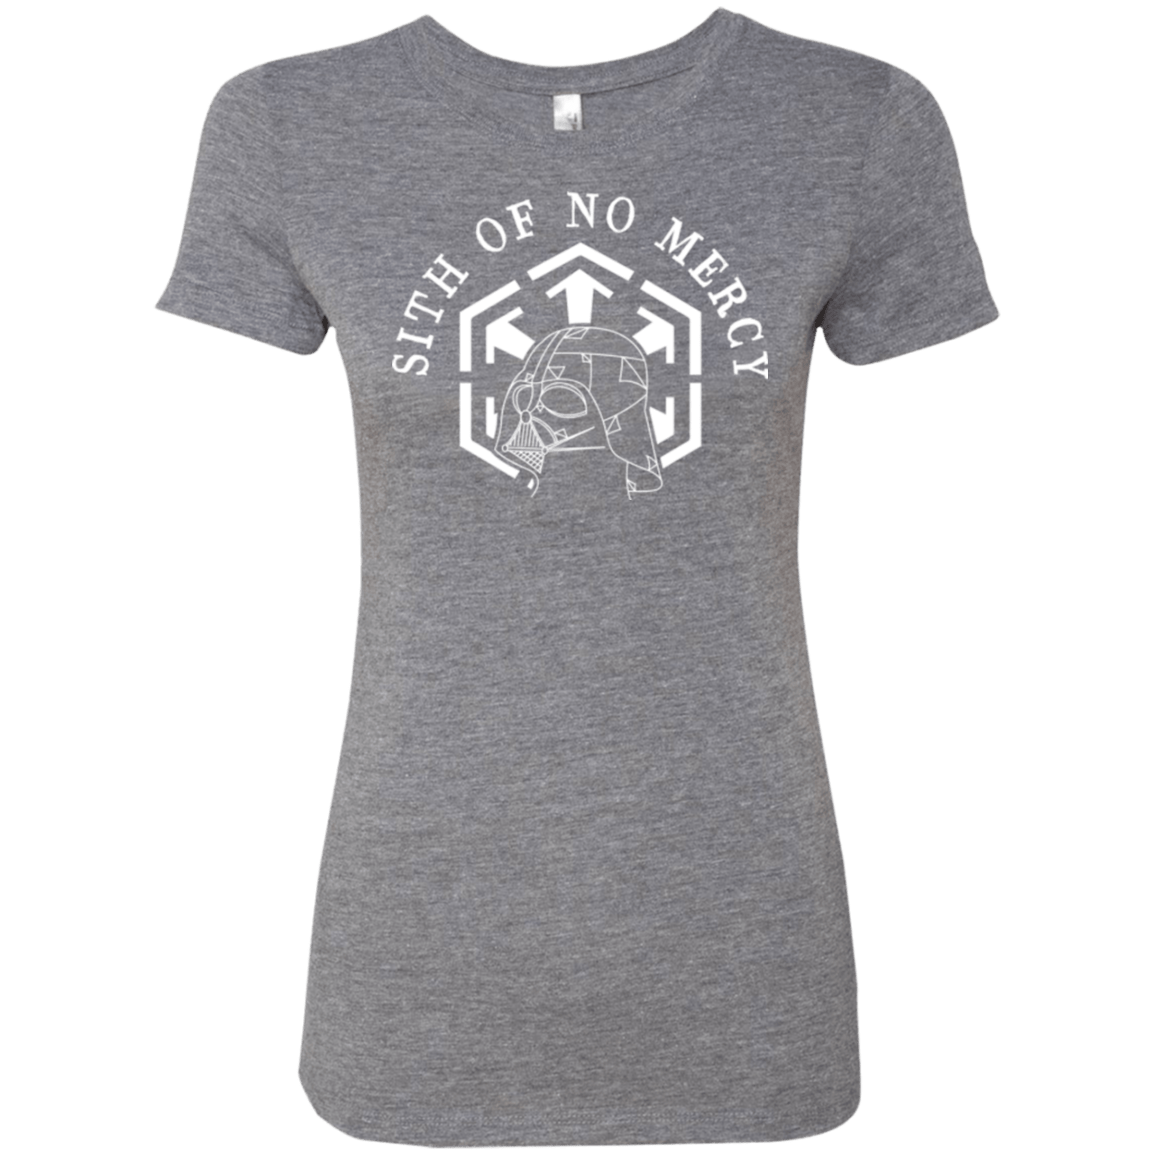 T-Shirts Premium Heather / Small SITH OF NO MERCY Women's Triblend T-Shirt